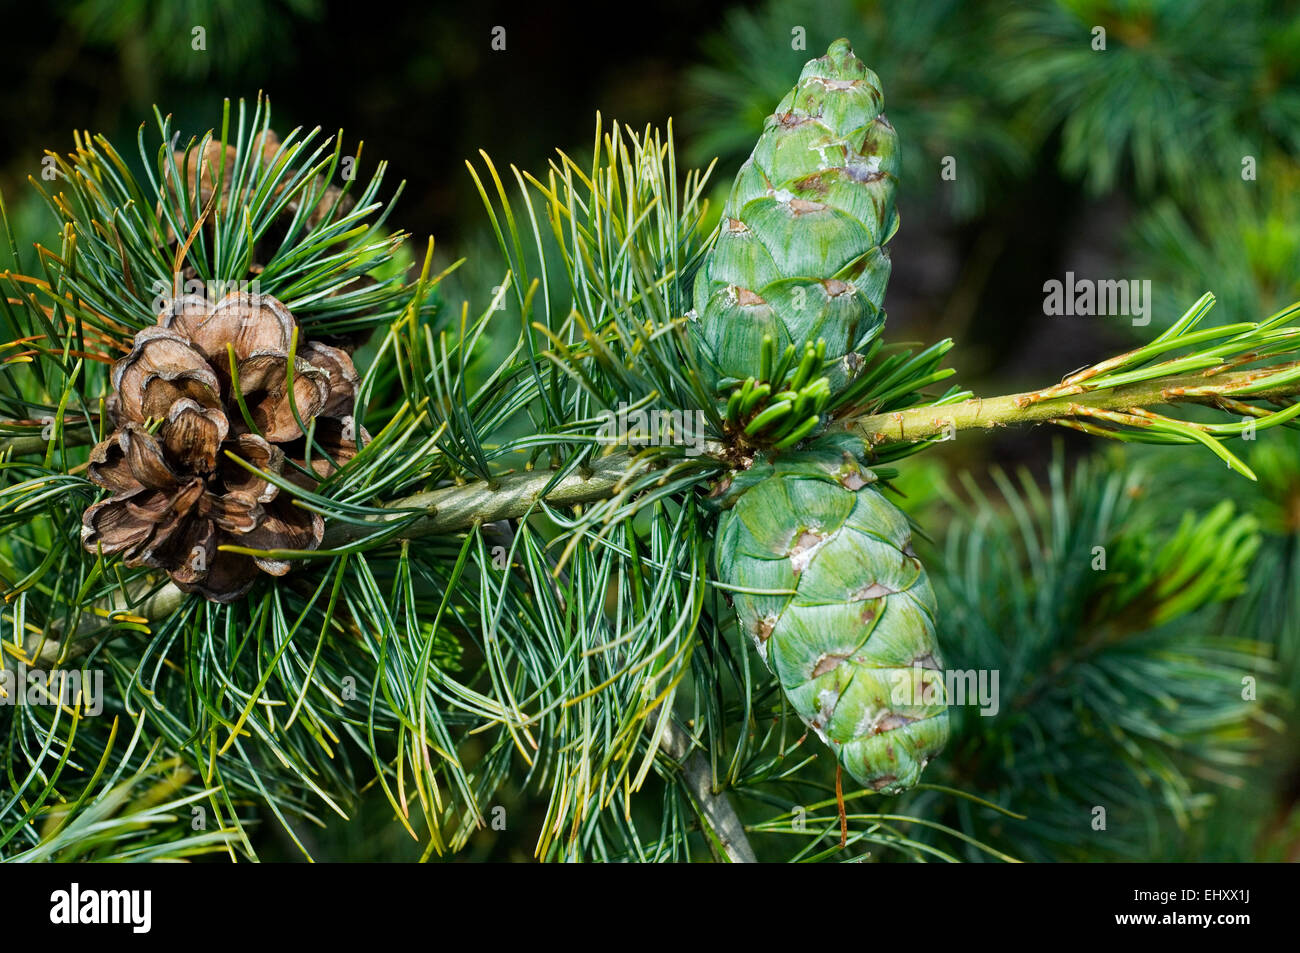 PlantFiles Pictures: Japanese White Pine, Japanese Five-Needled Pine  (<i>Pinus parviflora var. pentaphylla</i>) by WaterCan2